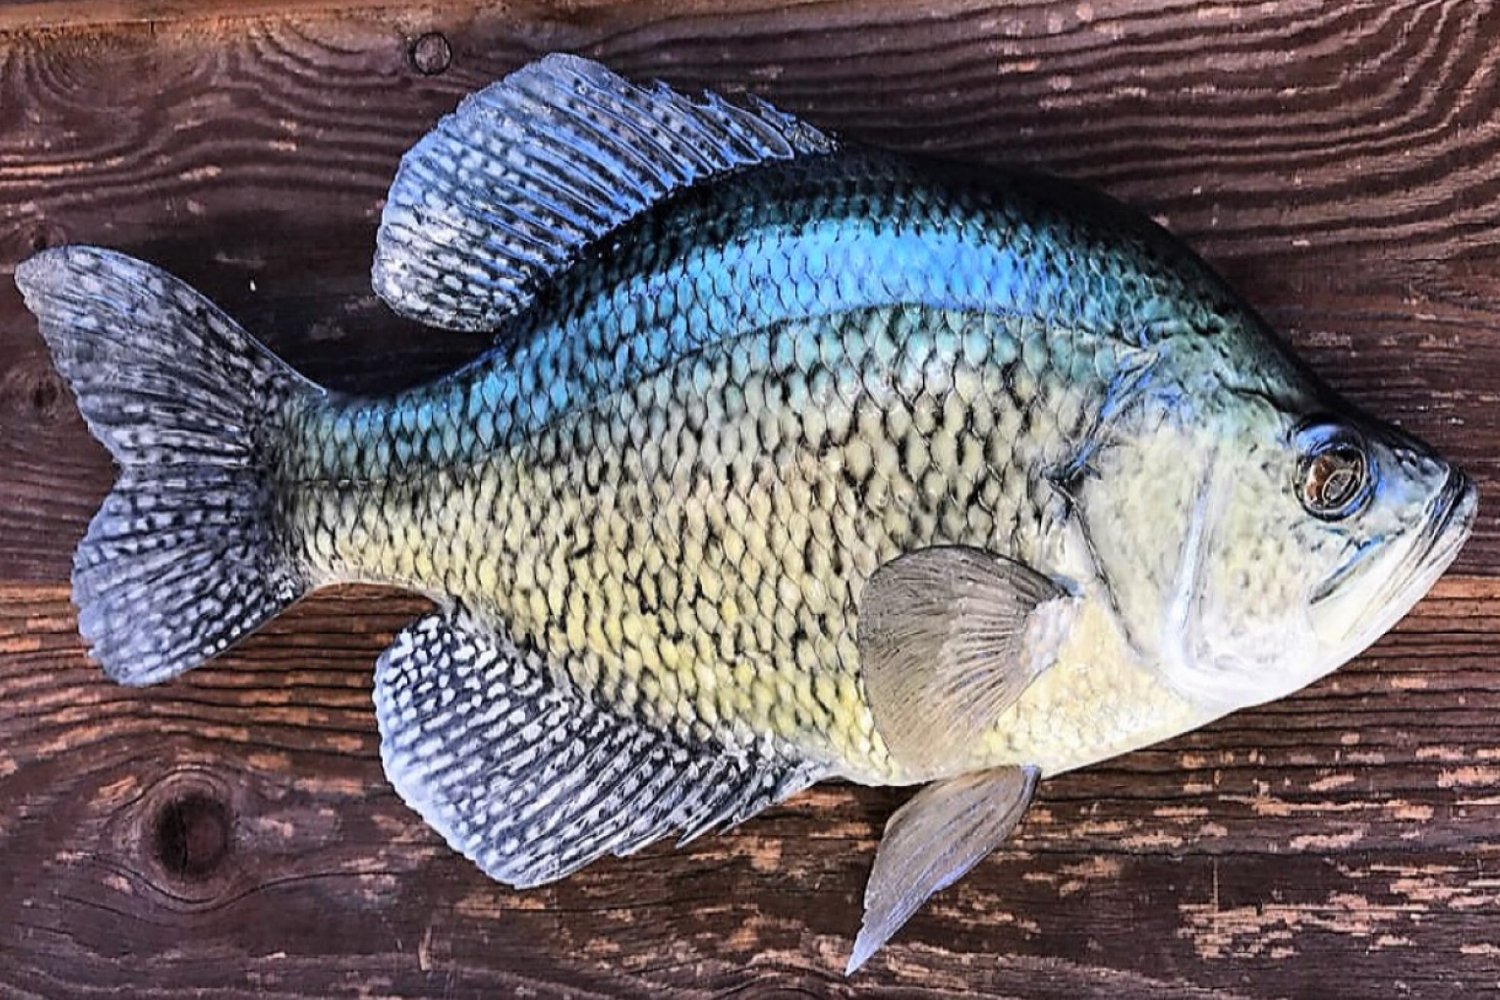 Crappie Facts to Help You Catch More Fish